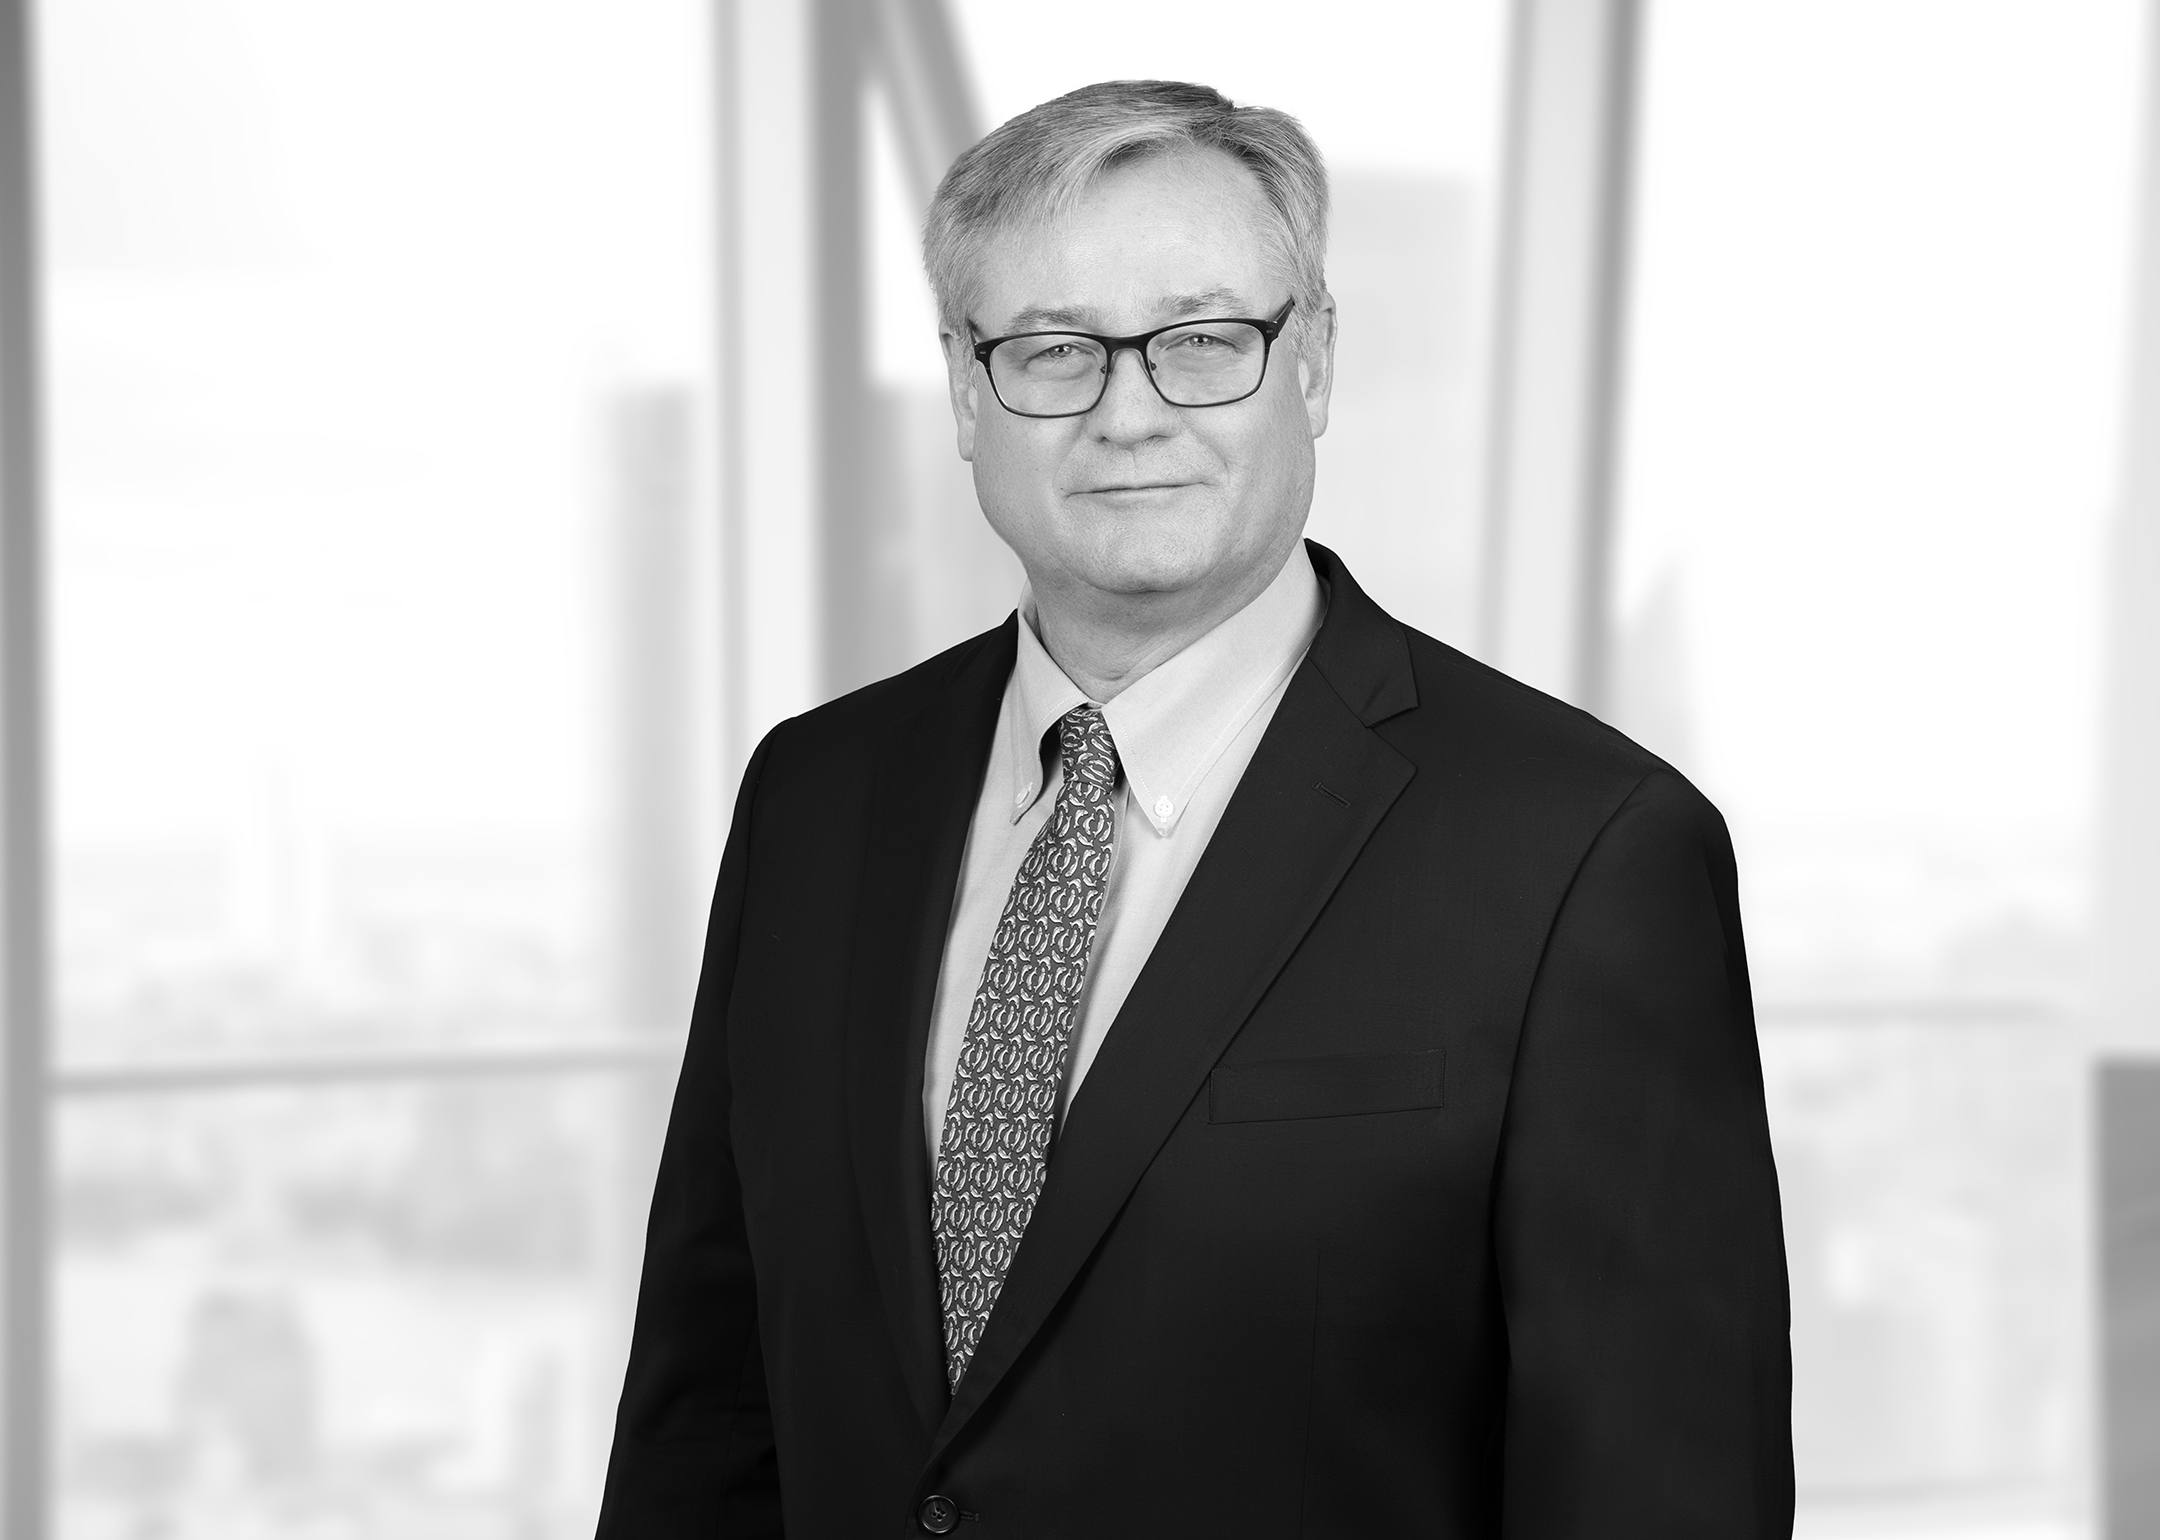 James C. Munsell, Partner, Investment Management & Private Equity